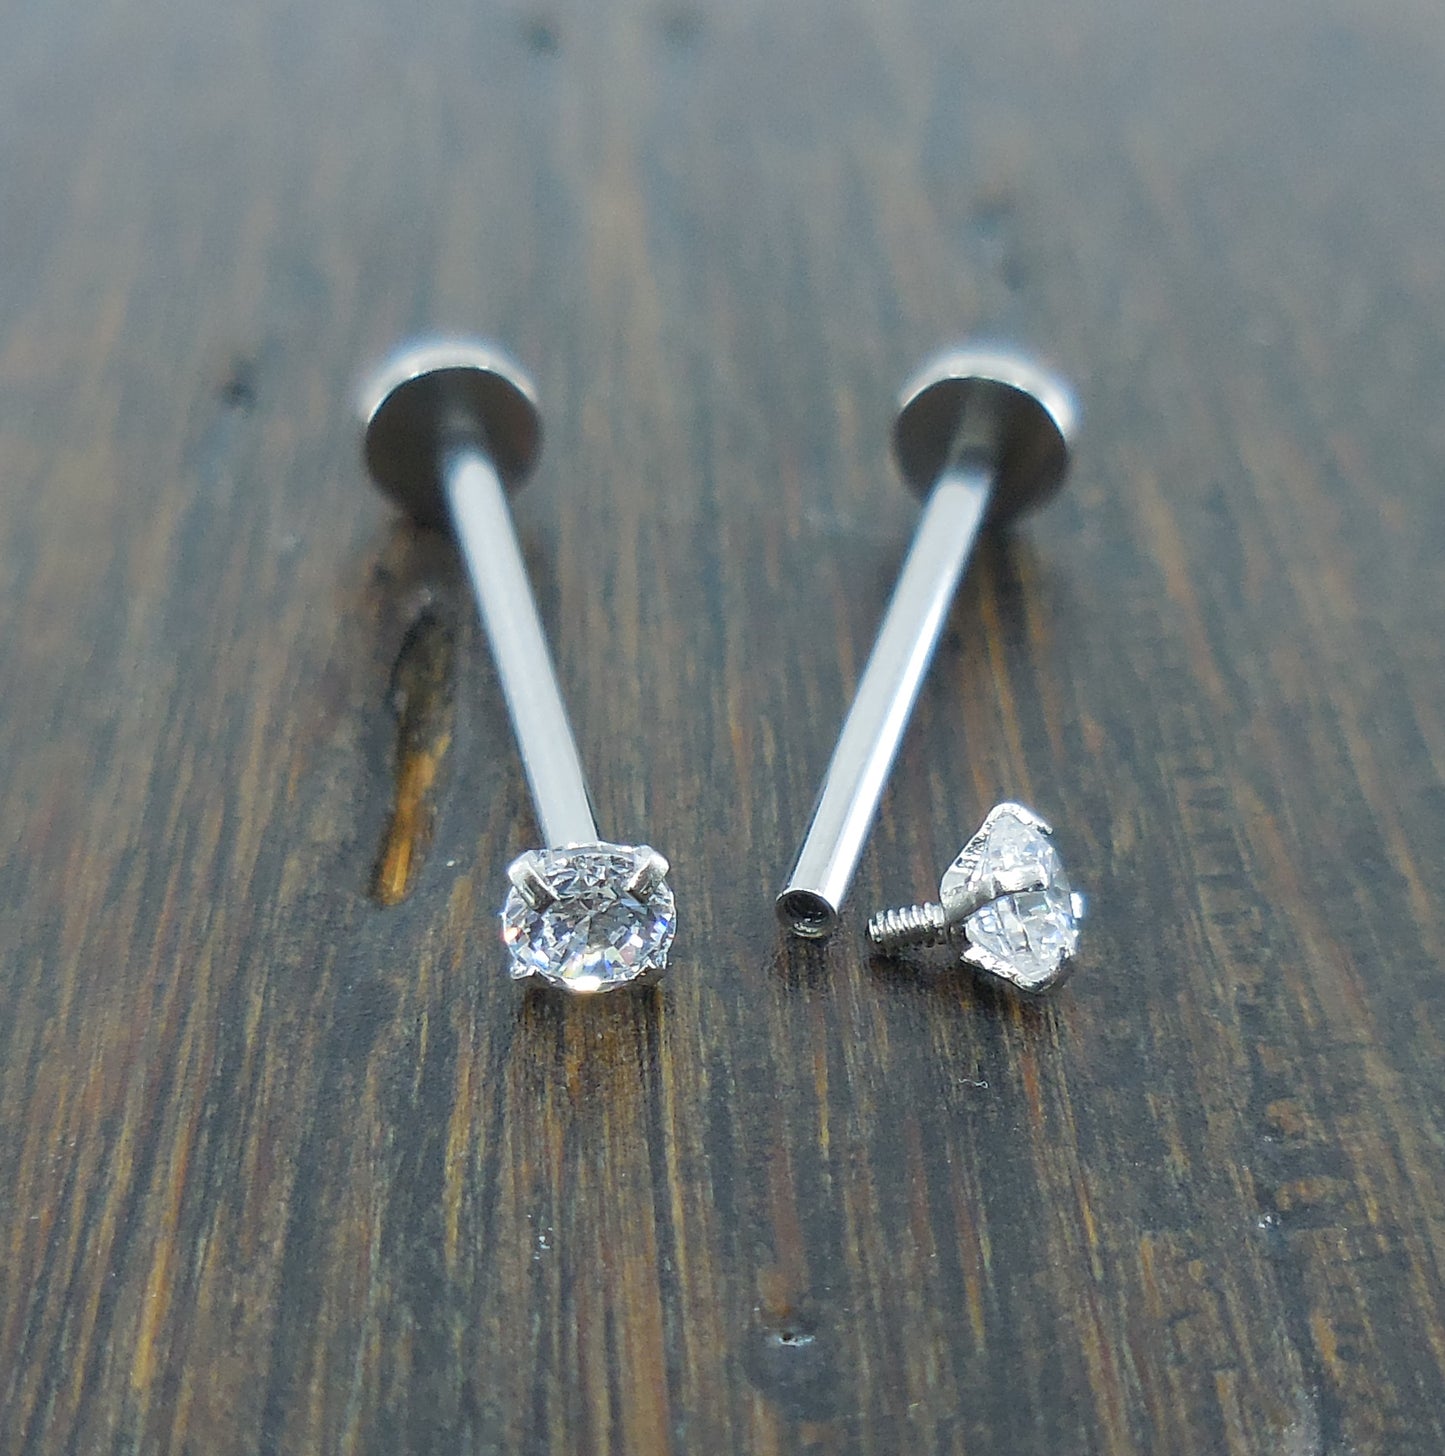 Pair Dimple Maker Cheek Piercings 3mm Clear Crystal CZ 16G 14mm, 16mm, 19mm Stainless Steel Internally Threaded Prong Set Labret Rings